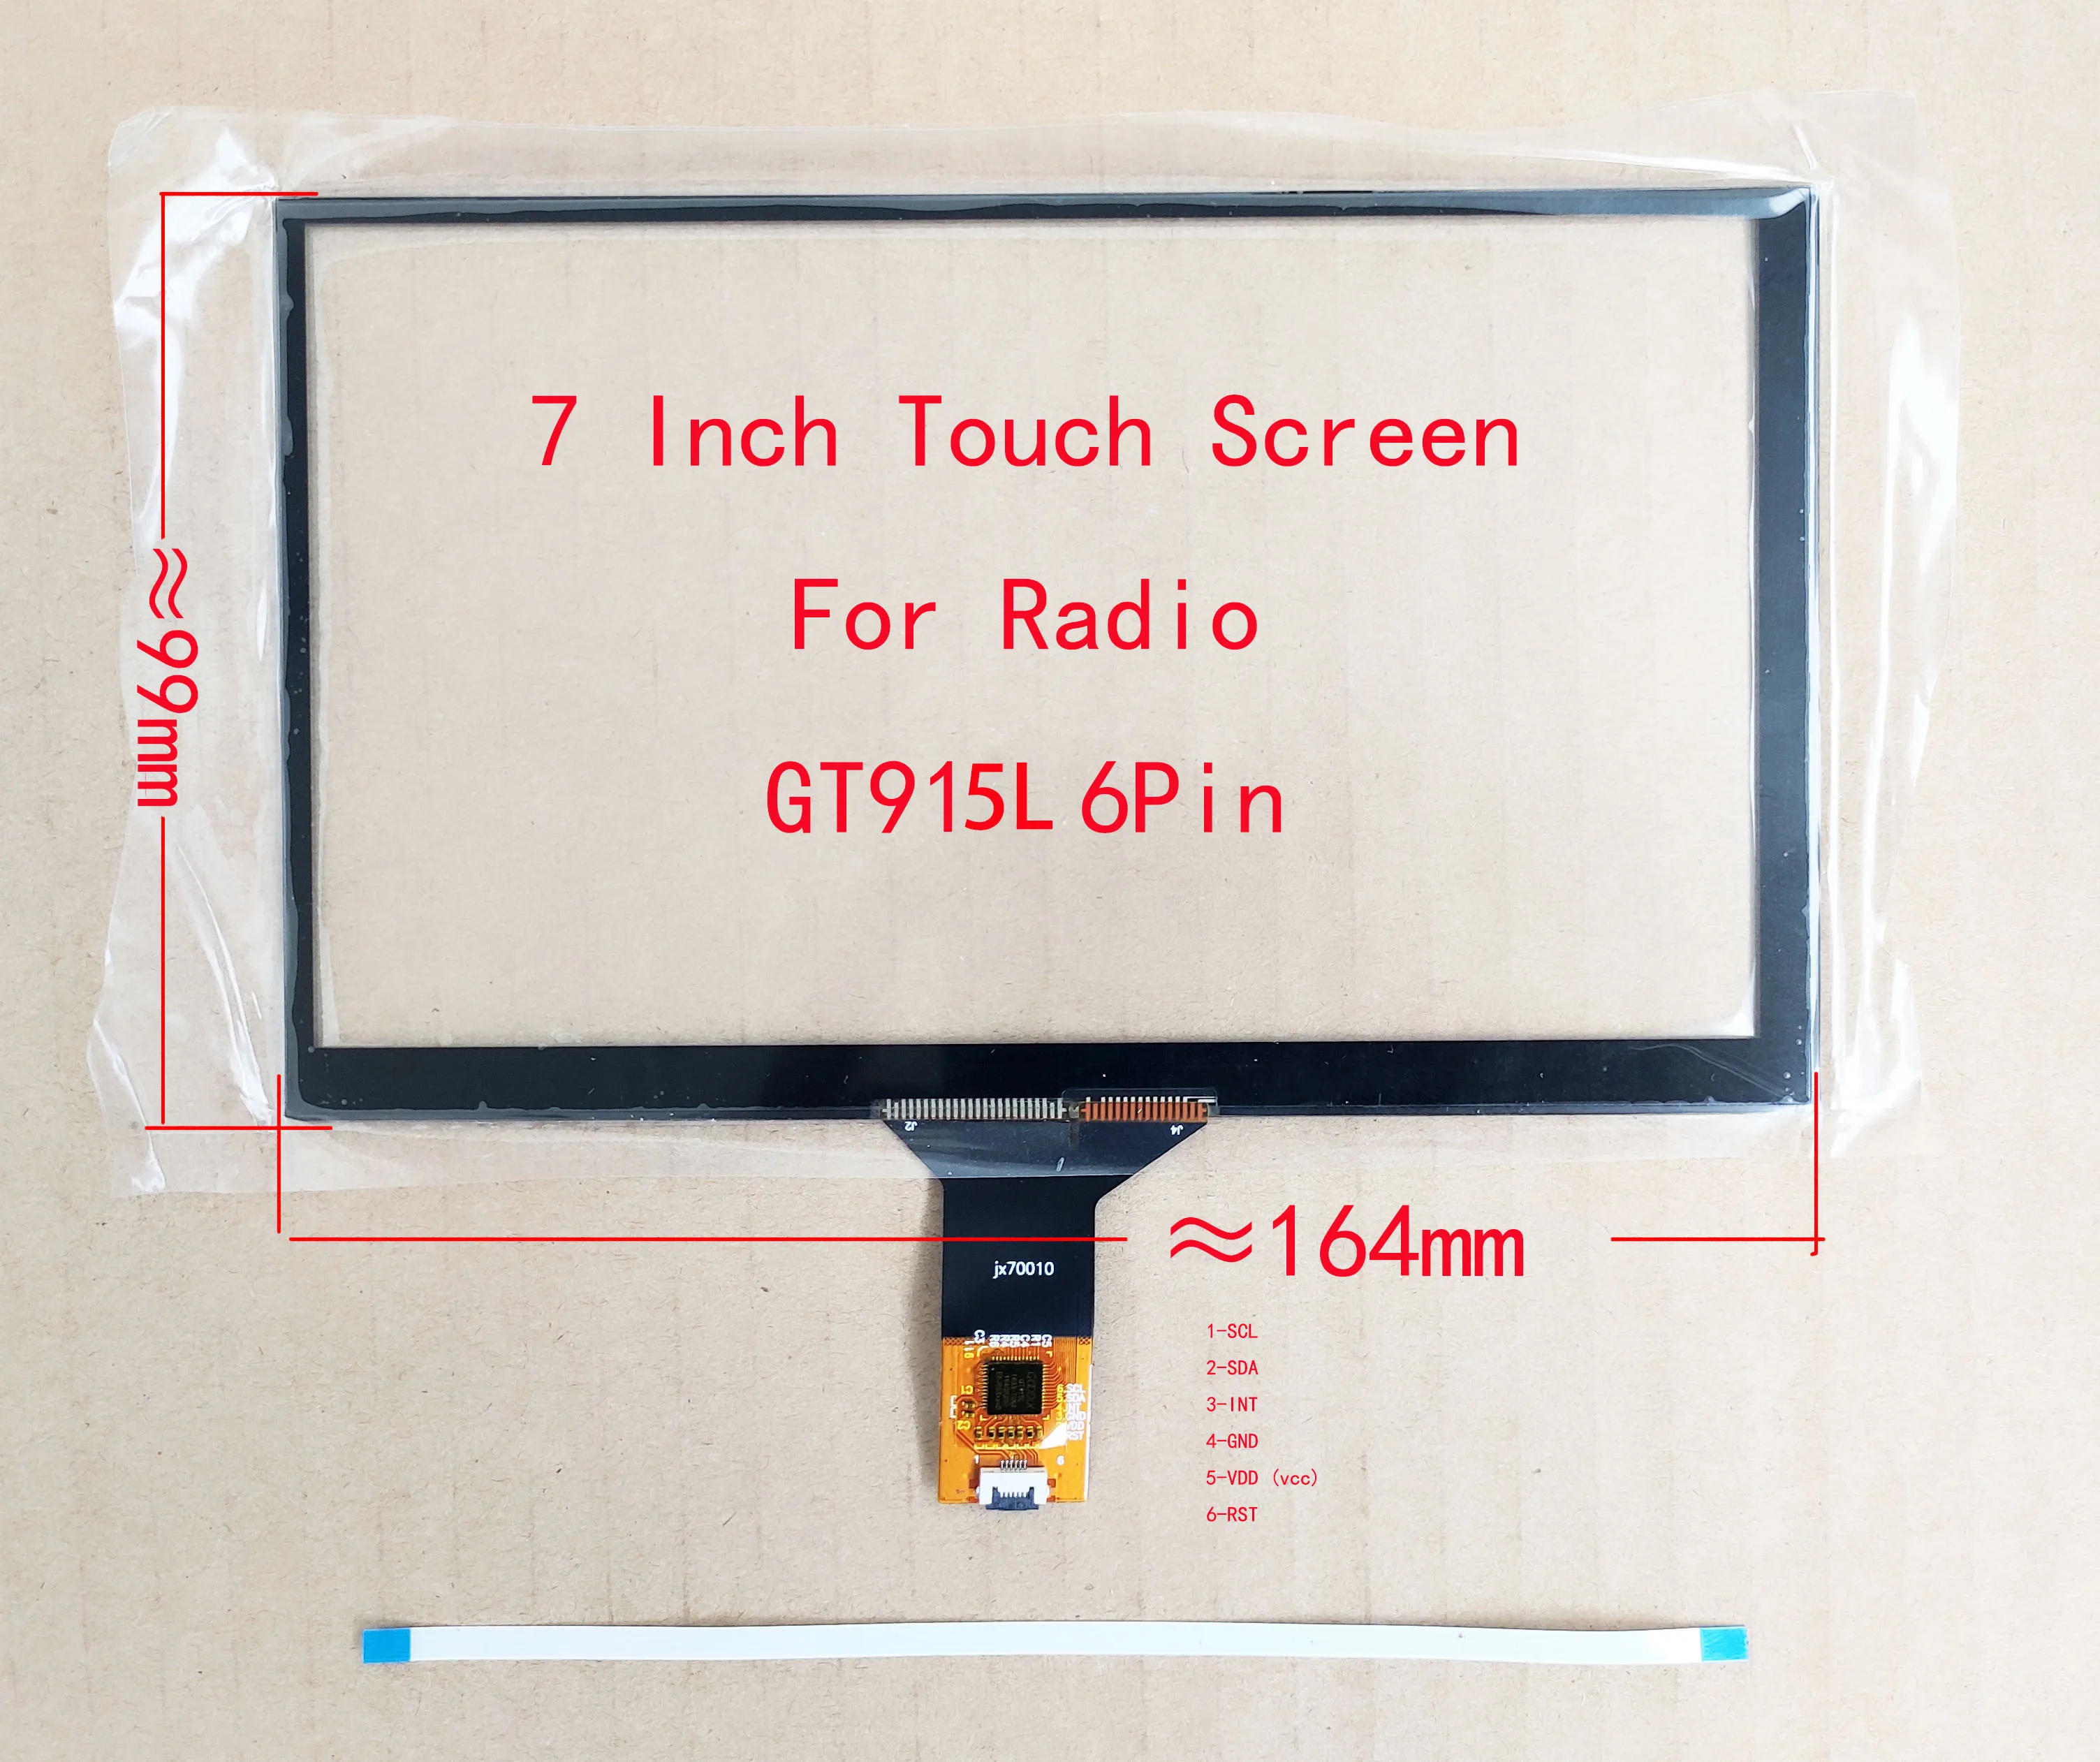 7 Inch Capacitive Touch Screen Digitizer Sensor For Radio Player 164*99mm  6Pin GT915L JX70010